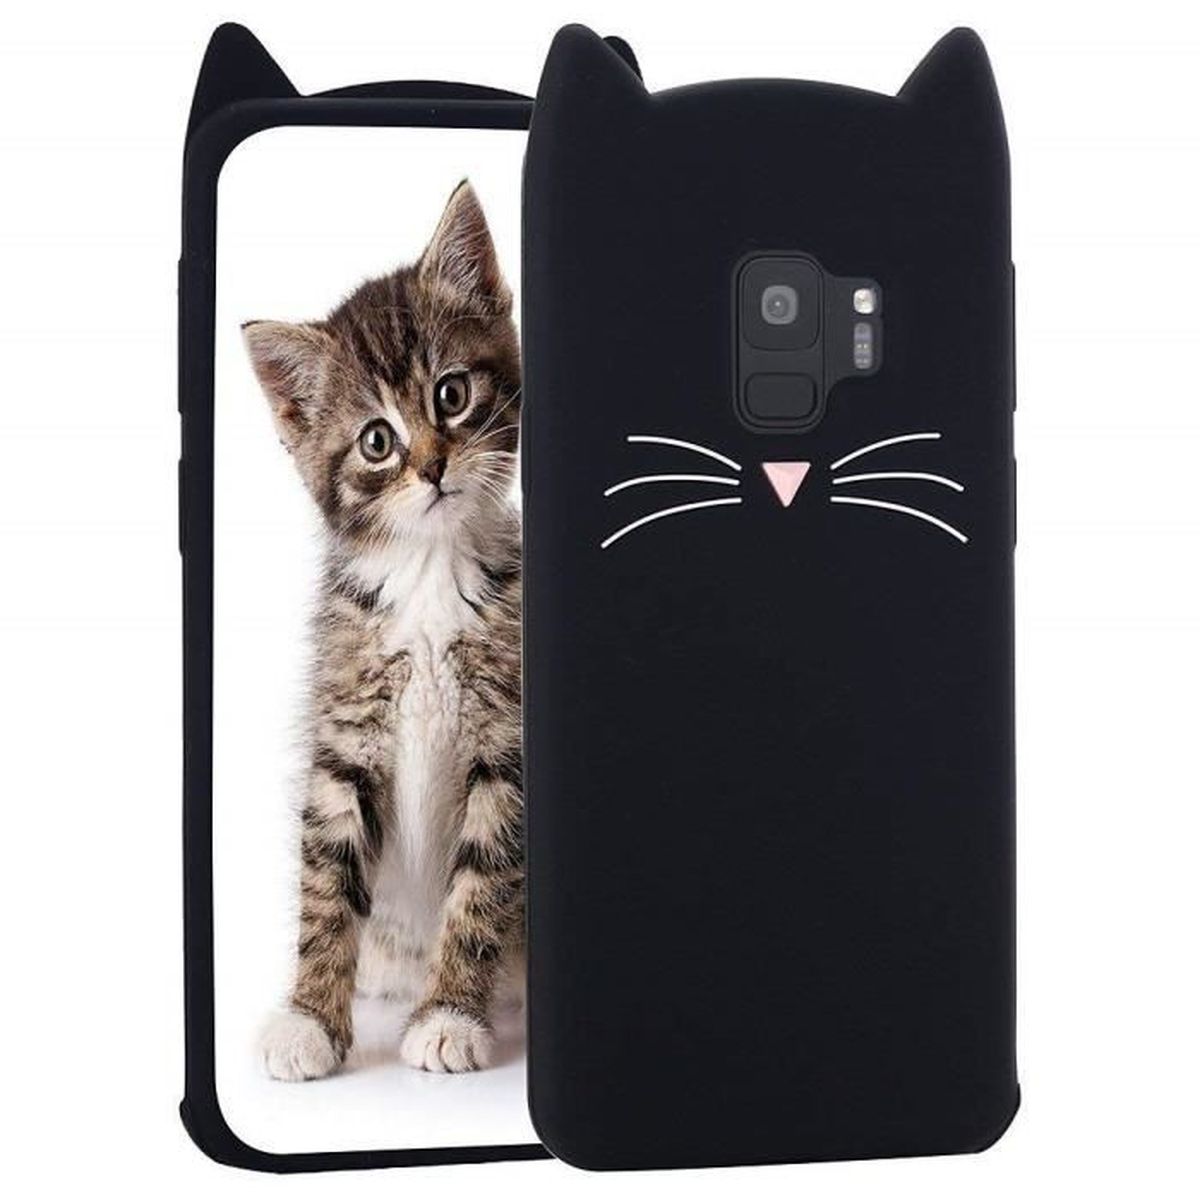 coque s9 samsung chat